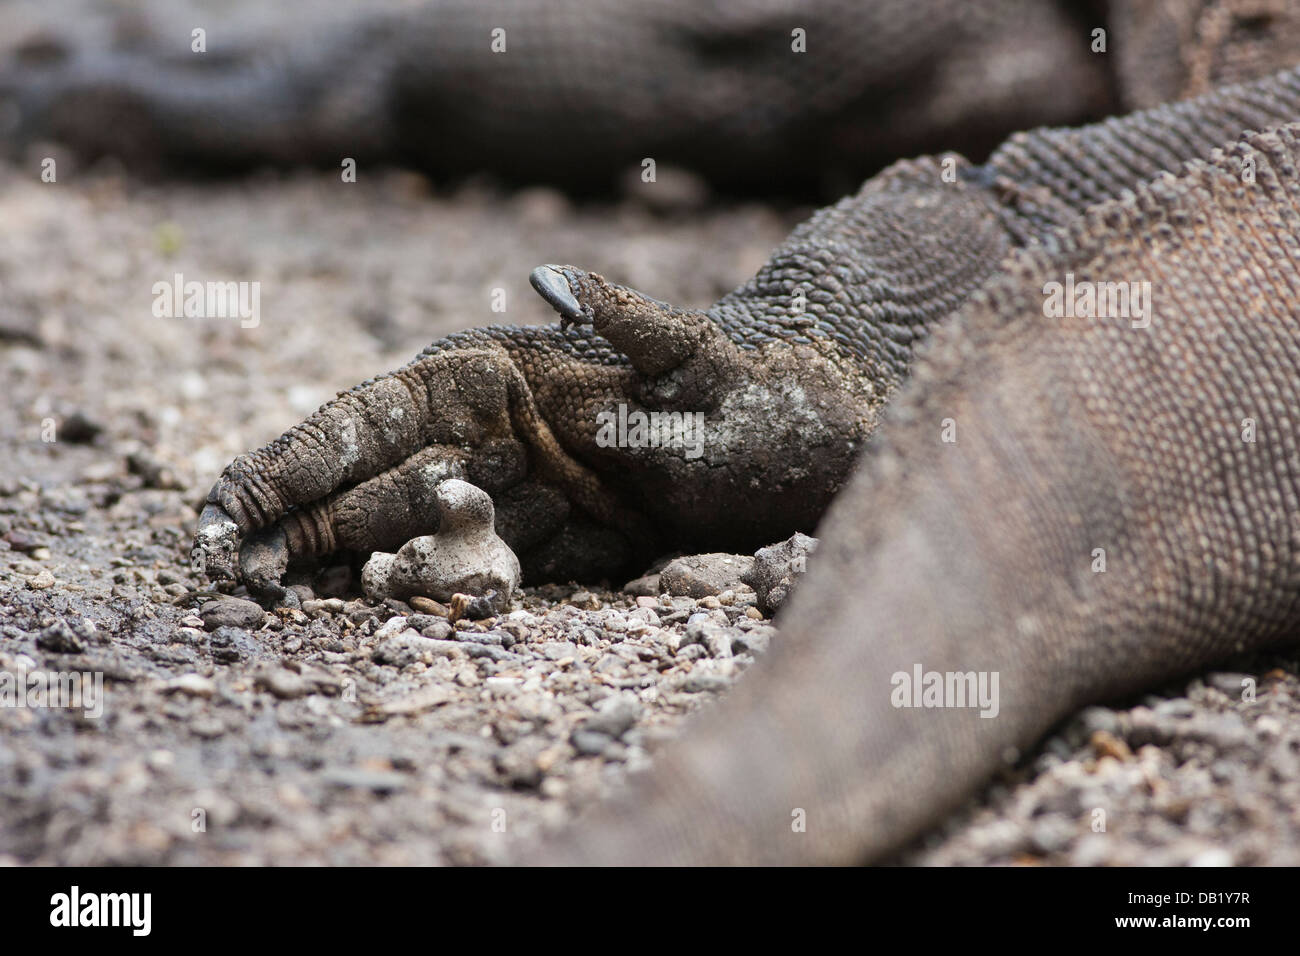 Hind leg of a komodo dragon with its giant claws Stock Photo